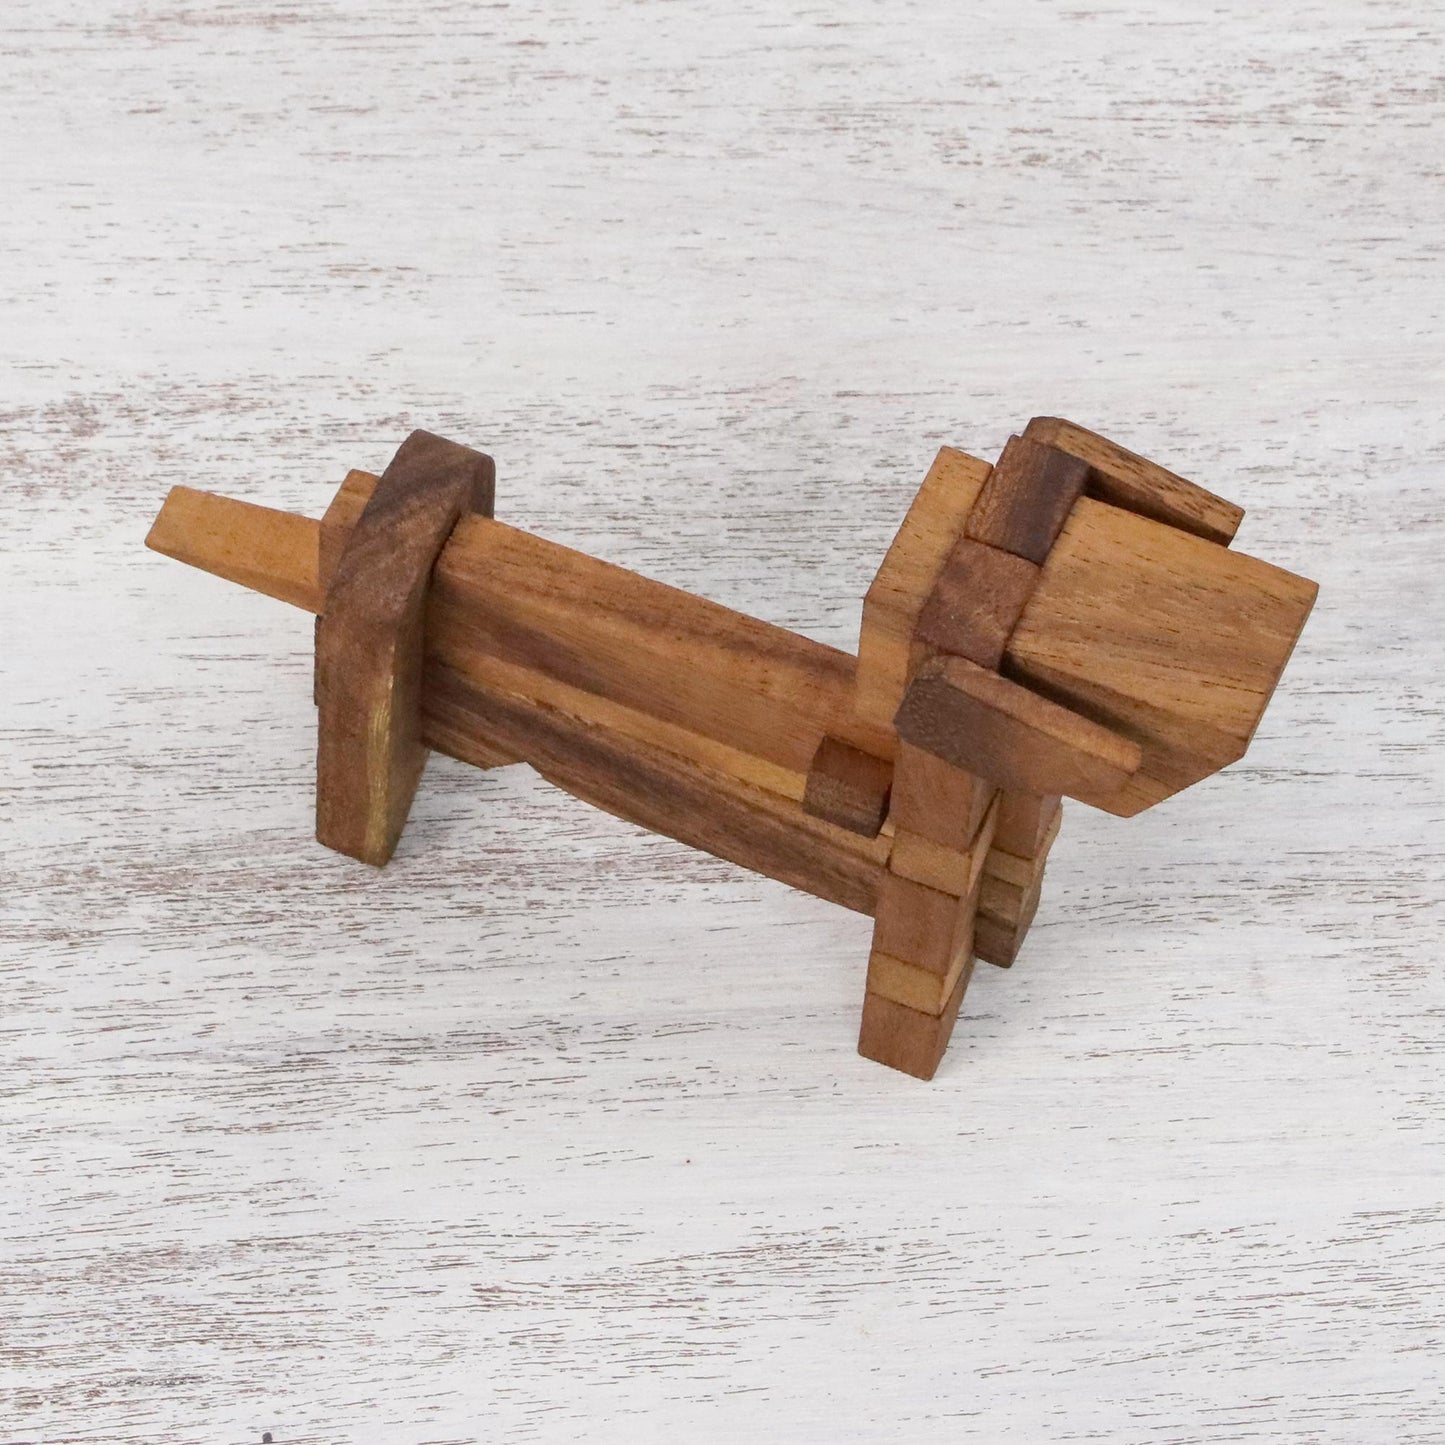 Excited Puppy Handcrafted Wood Dog-Shaped Puzzle from Thailand